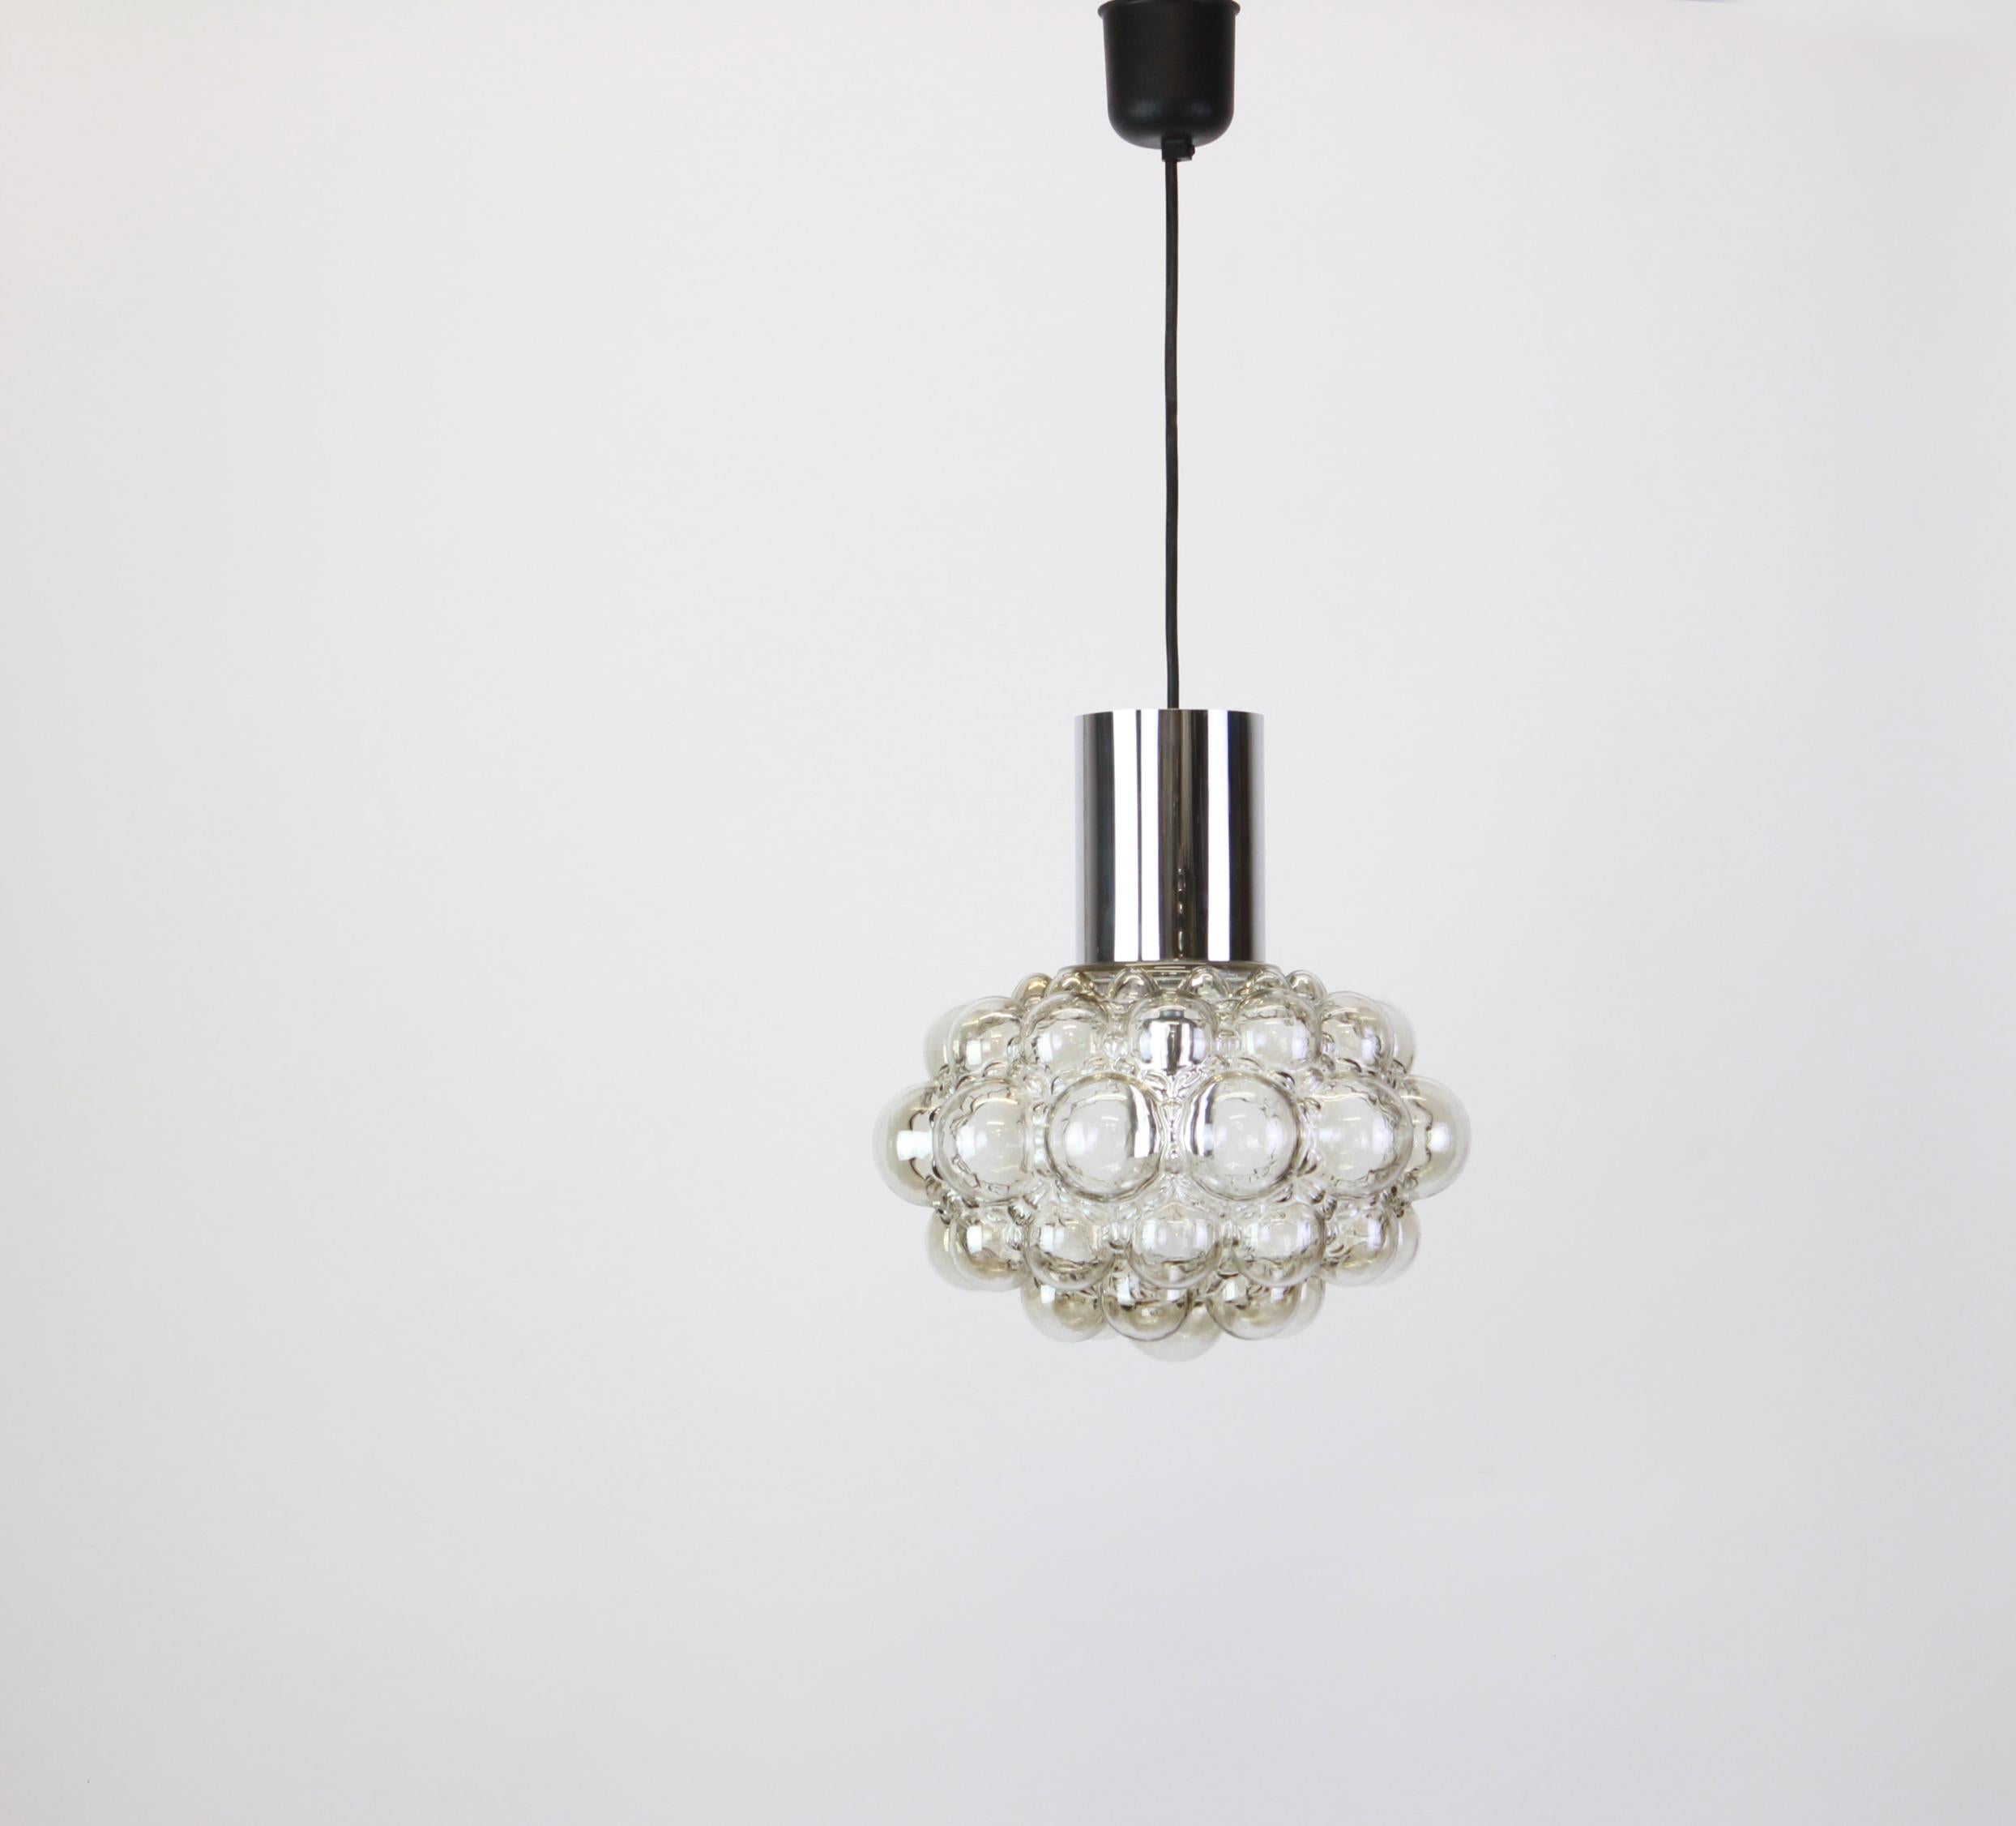 A large round bubble glass pendant designed by Helena Tynell for Limburg, manufactured in Germany, circa 1970s.

Sockets: needs 1 x E27 standard bulb with 100W max each and compatible with the US/UK/ etc standards
Drop rod can be adjusted as